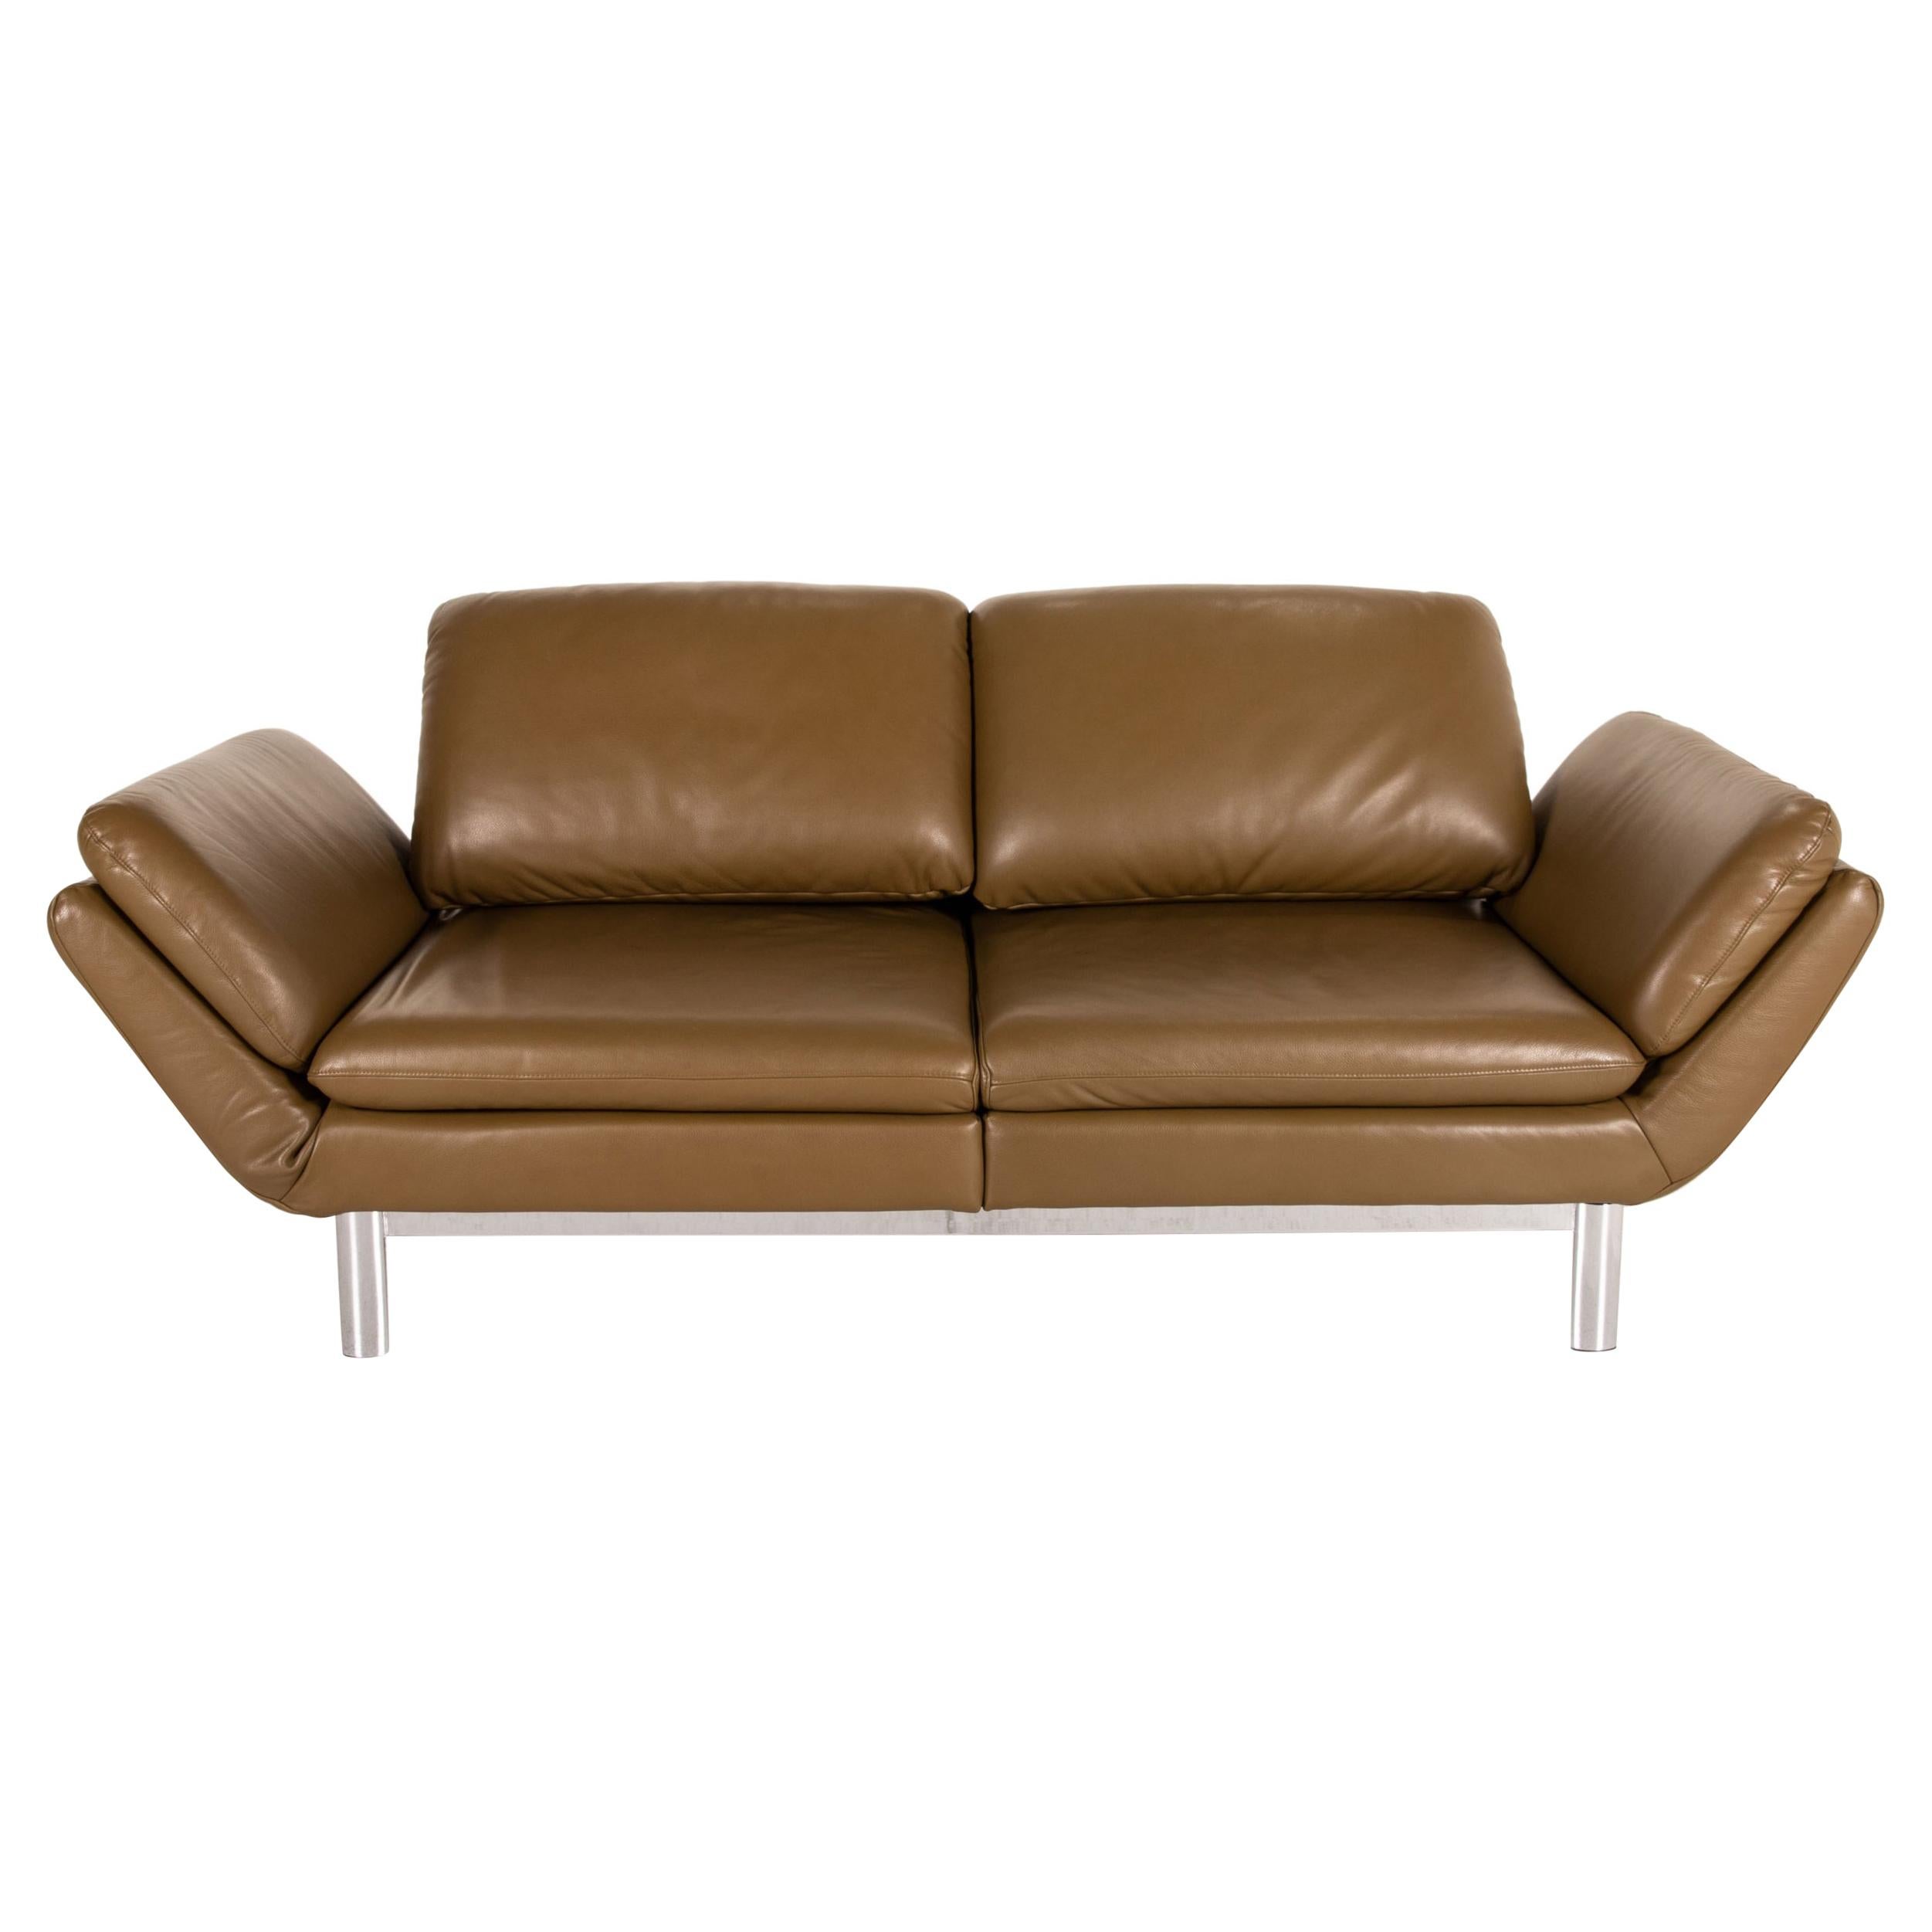 Musterring MR 675 Leather Sofa Green Olive Two-Seater Function Relax Function